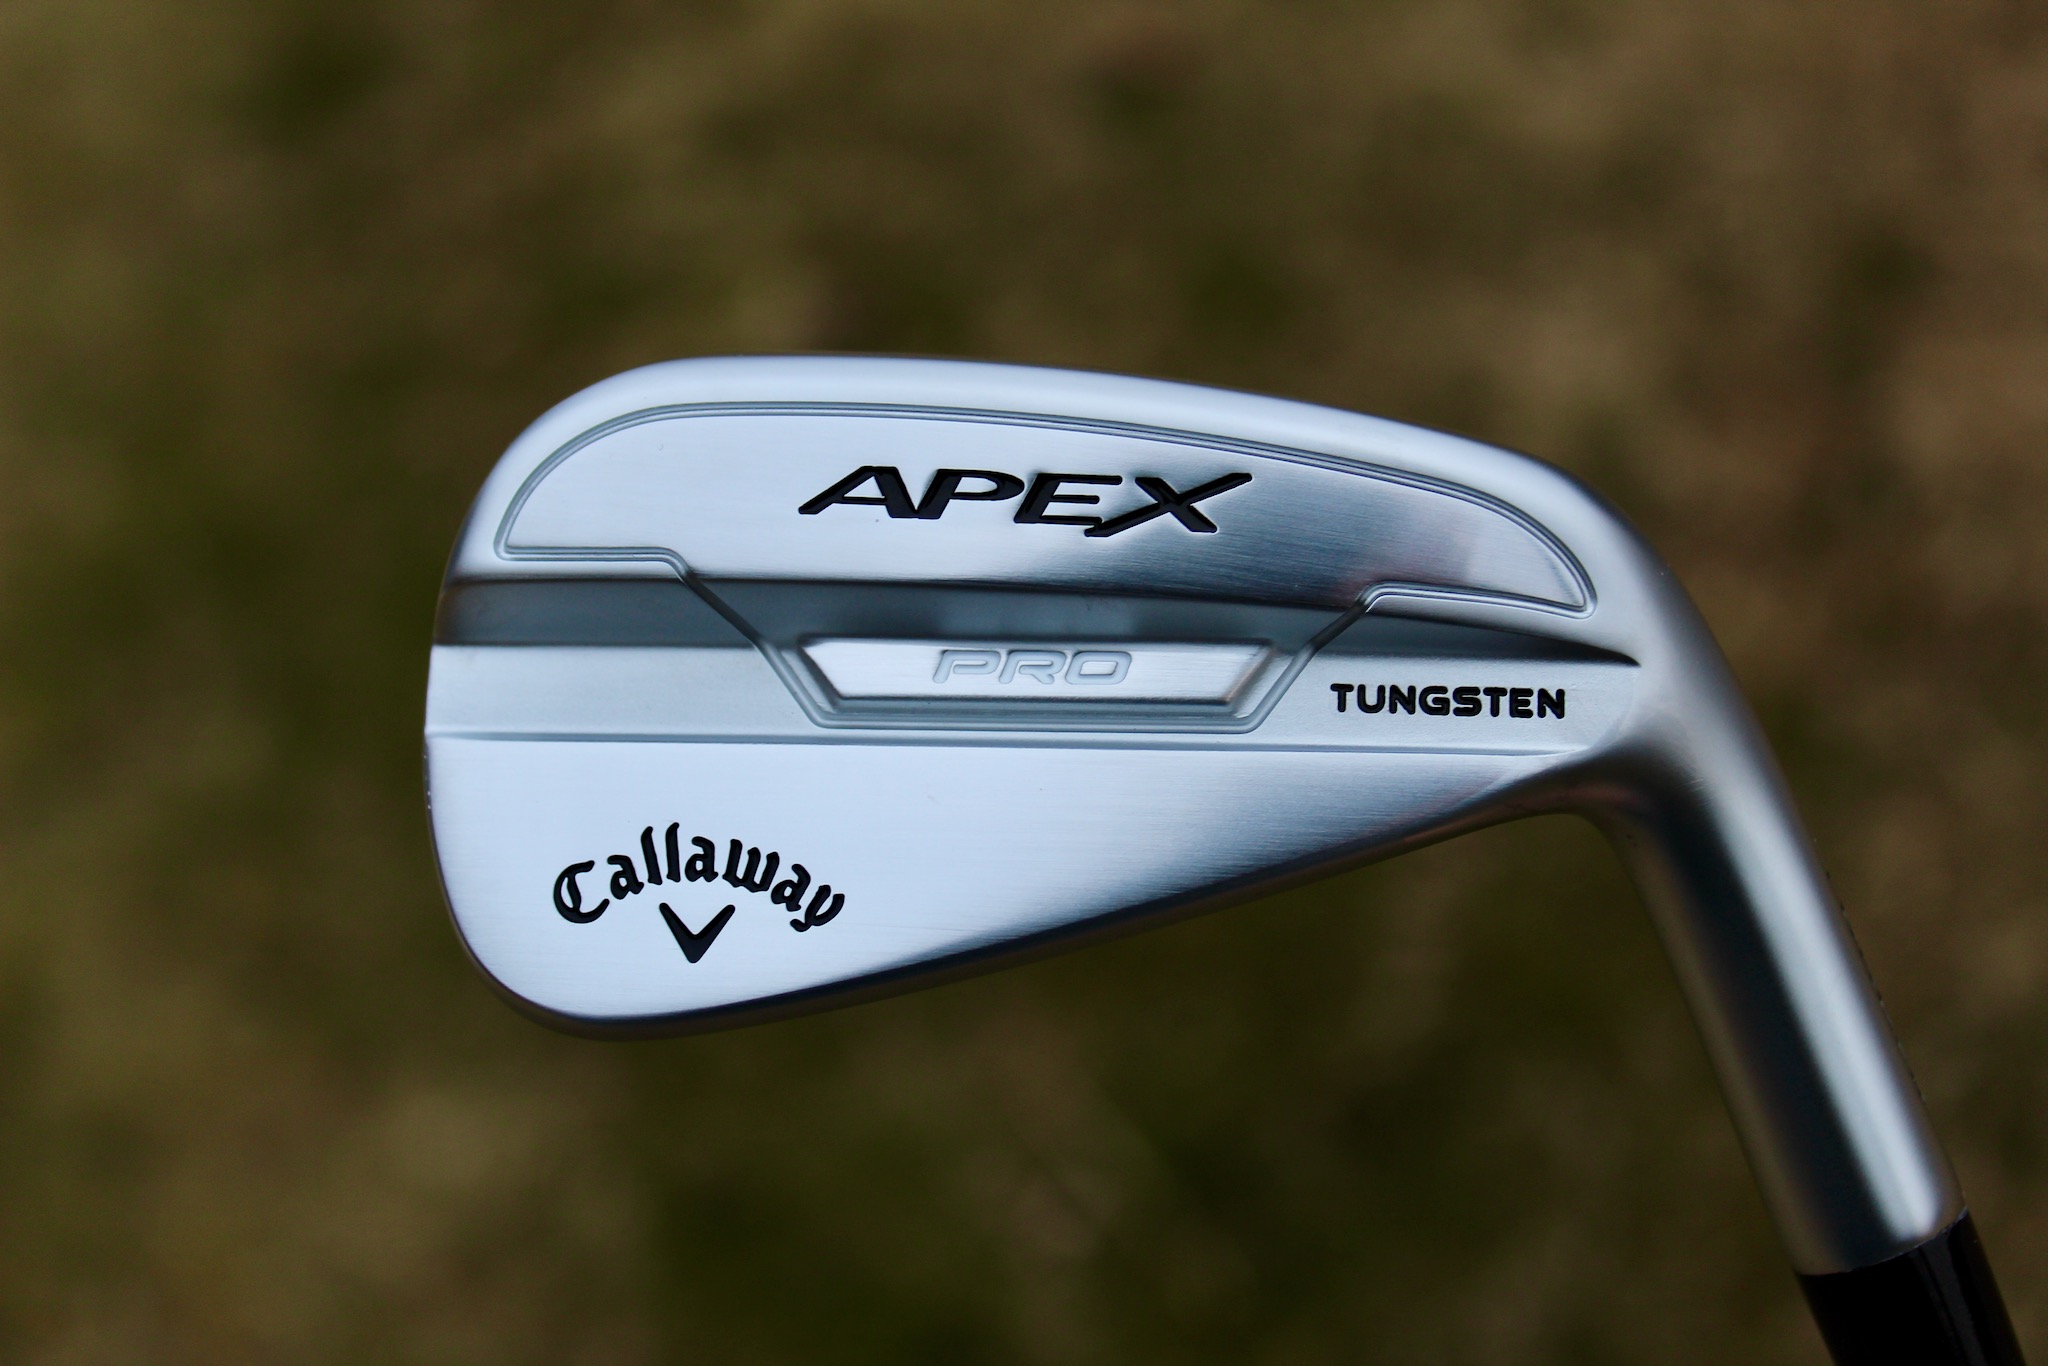 New Callaway  Apex, Apex Pro, and Apex DCB irons: Could this